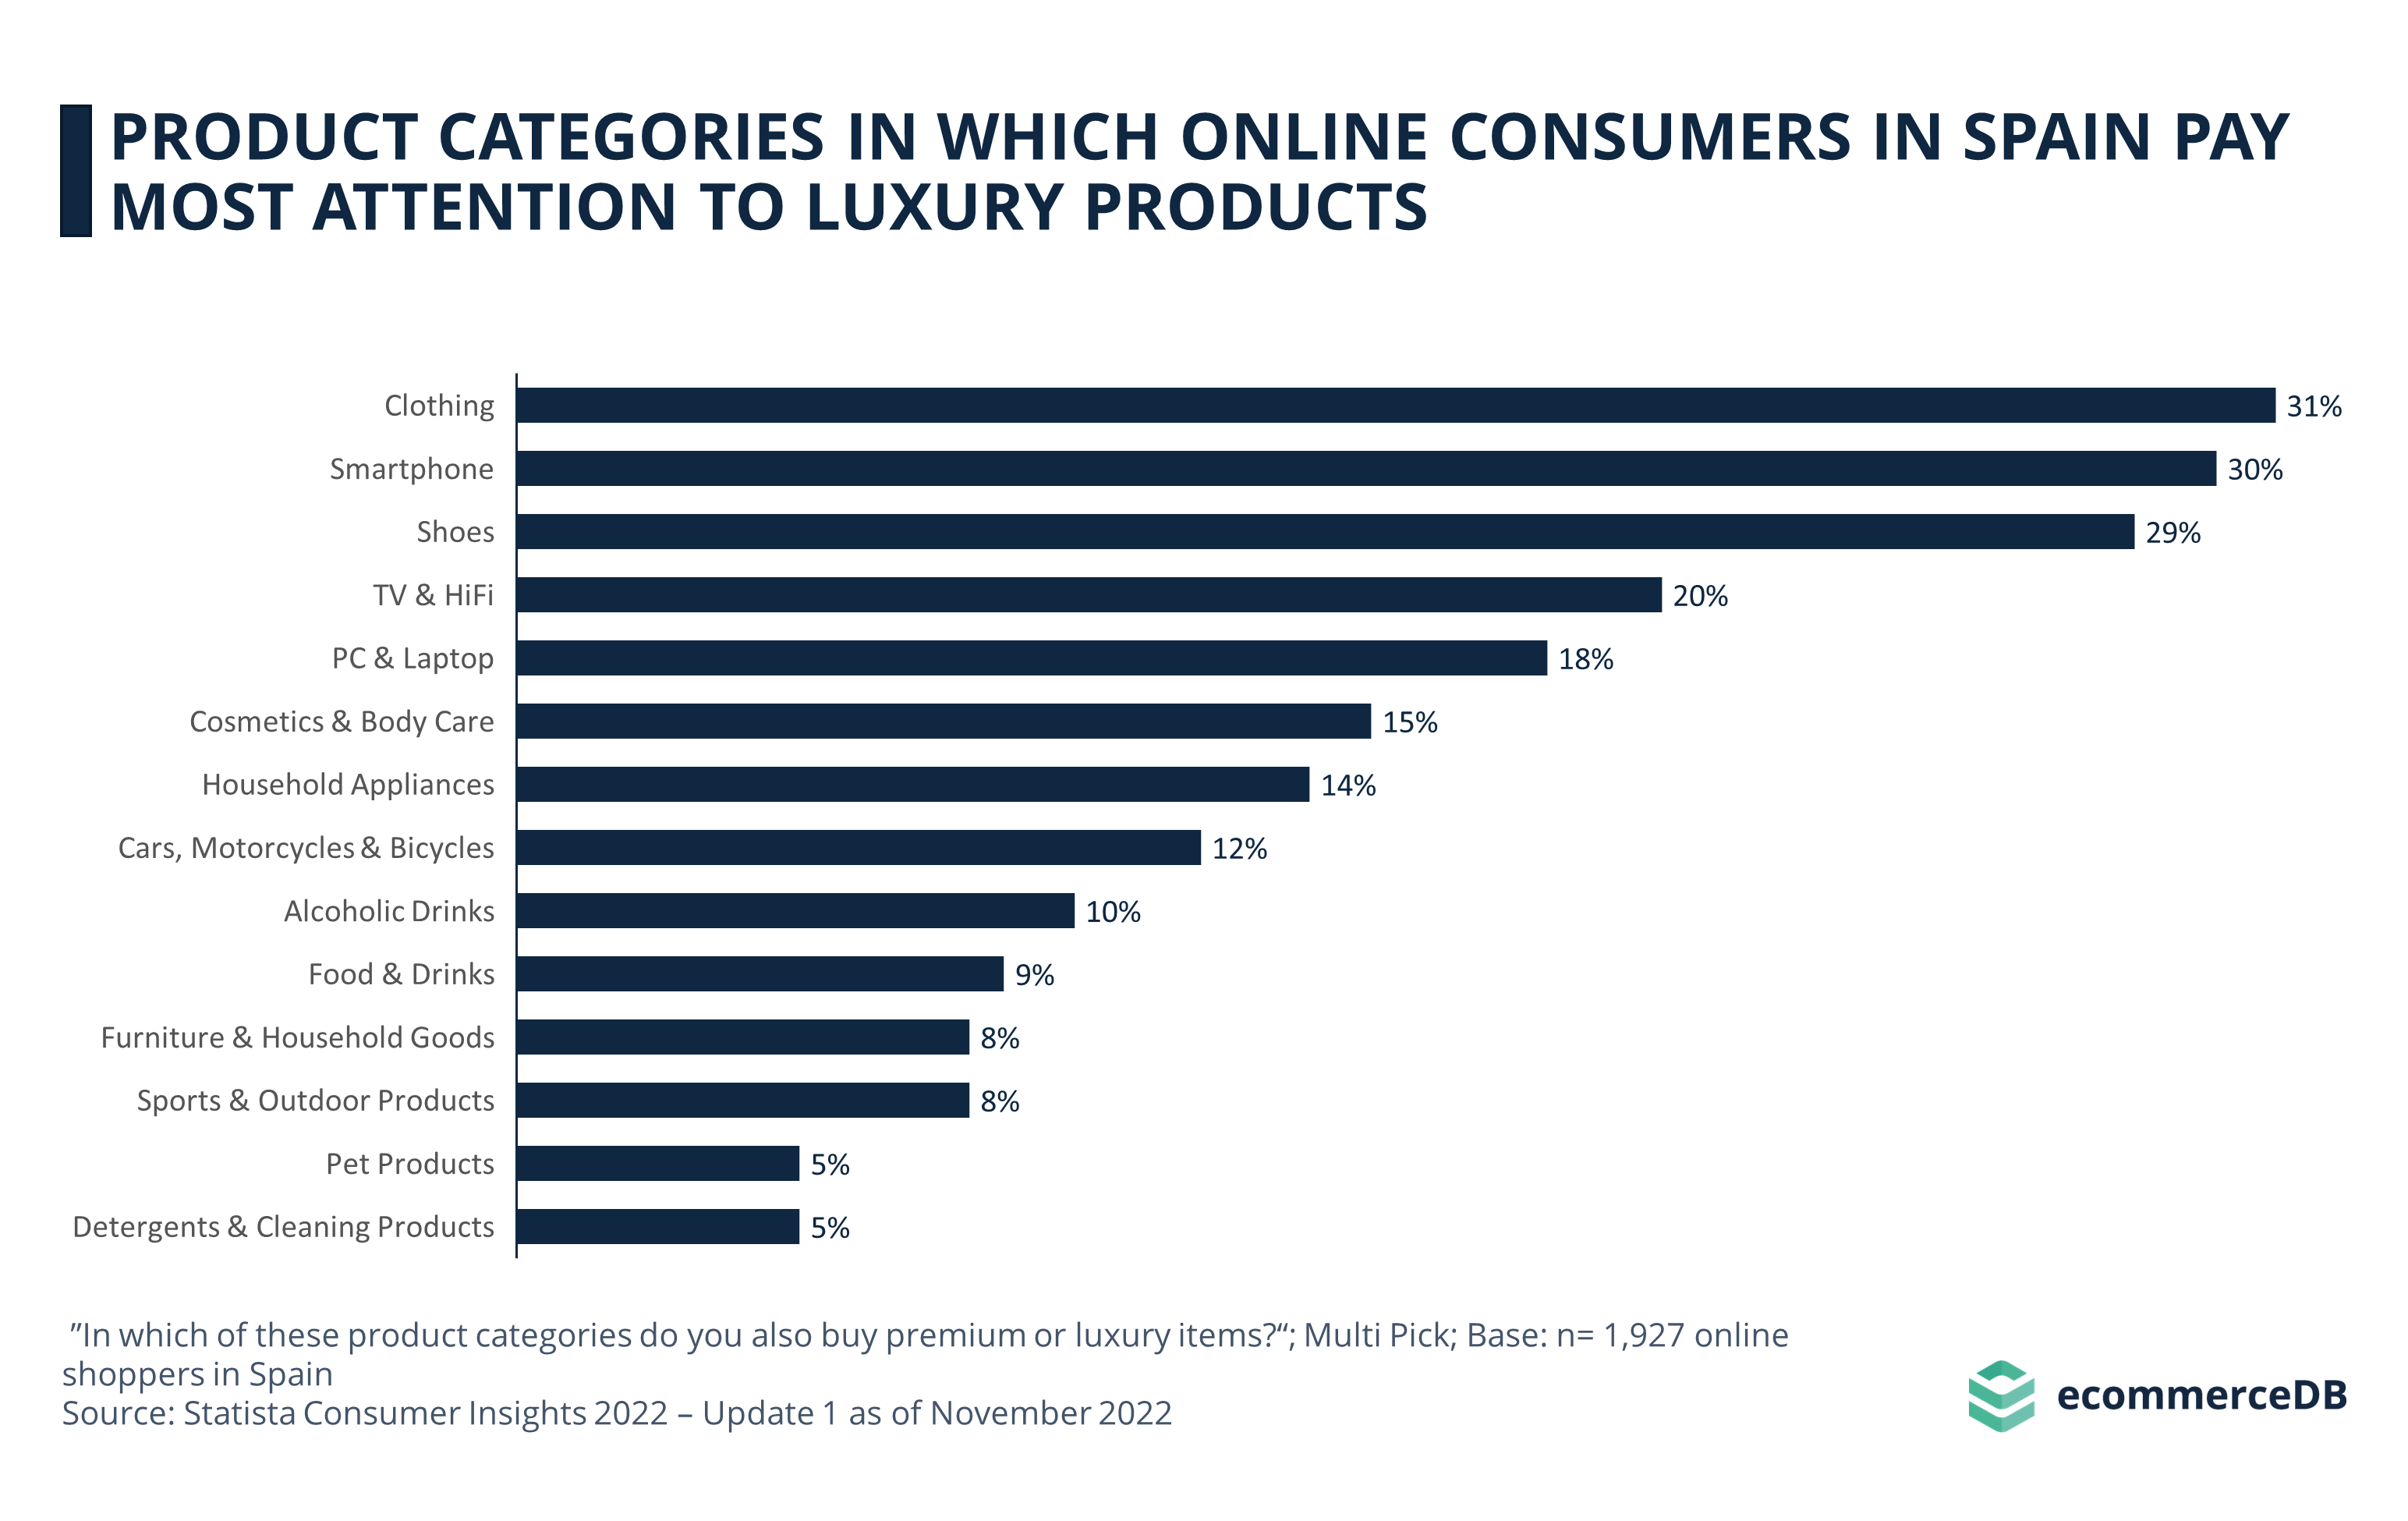 Online Shoppers in Spain Pay Most Attention to Luxury Products in